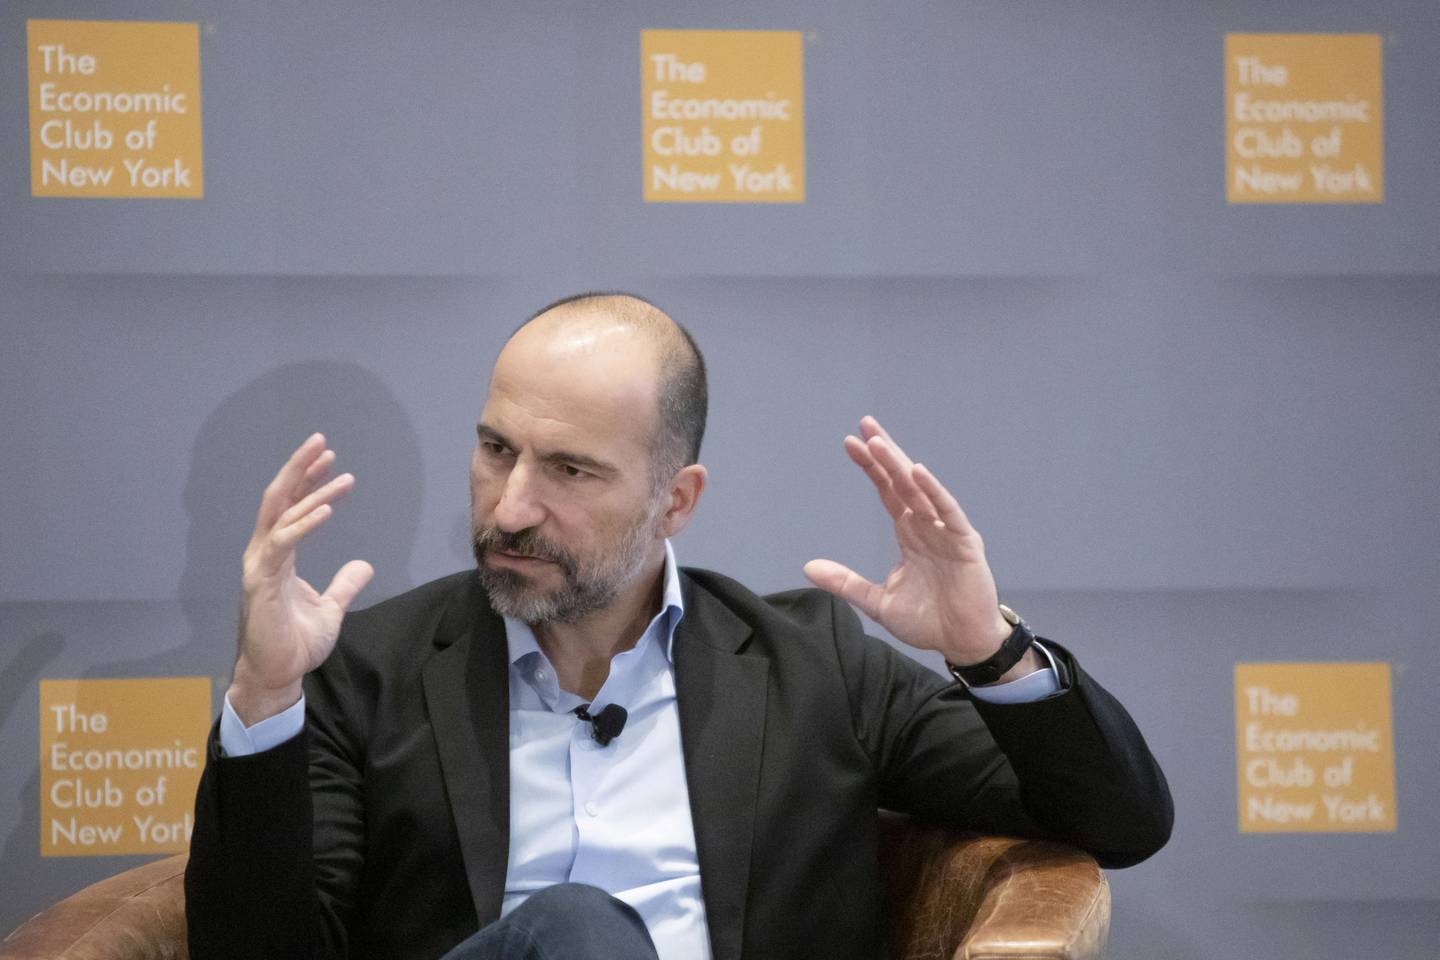 Uber’s chief executive Dara Khosrowshahi said more consumers are active on its platform than ever before. Reuters